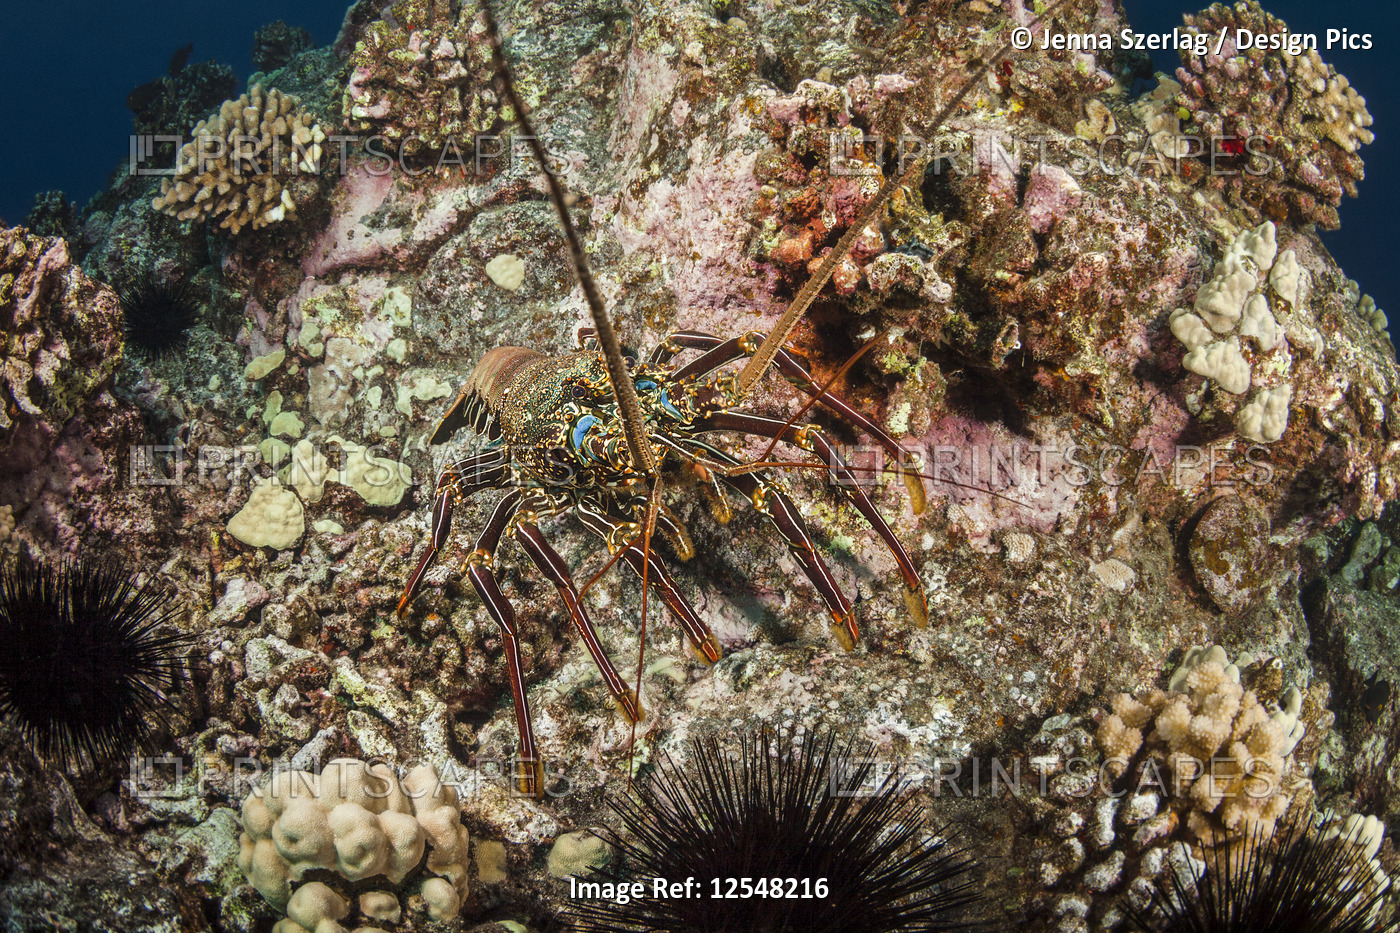 Pacific spiny lobster (Palinuridae) on a colourful reef; Island of Hawaii, ...